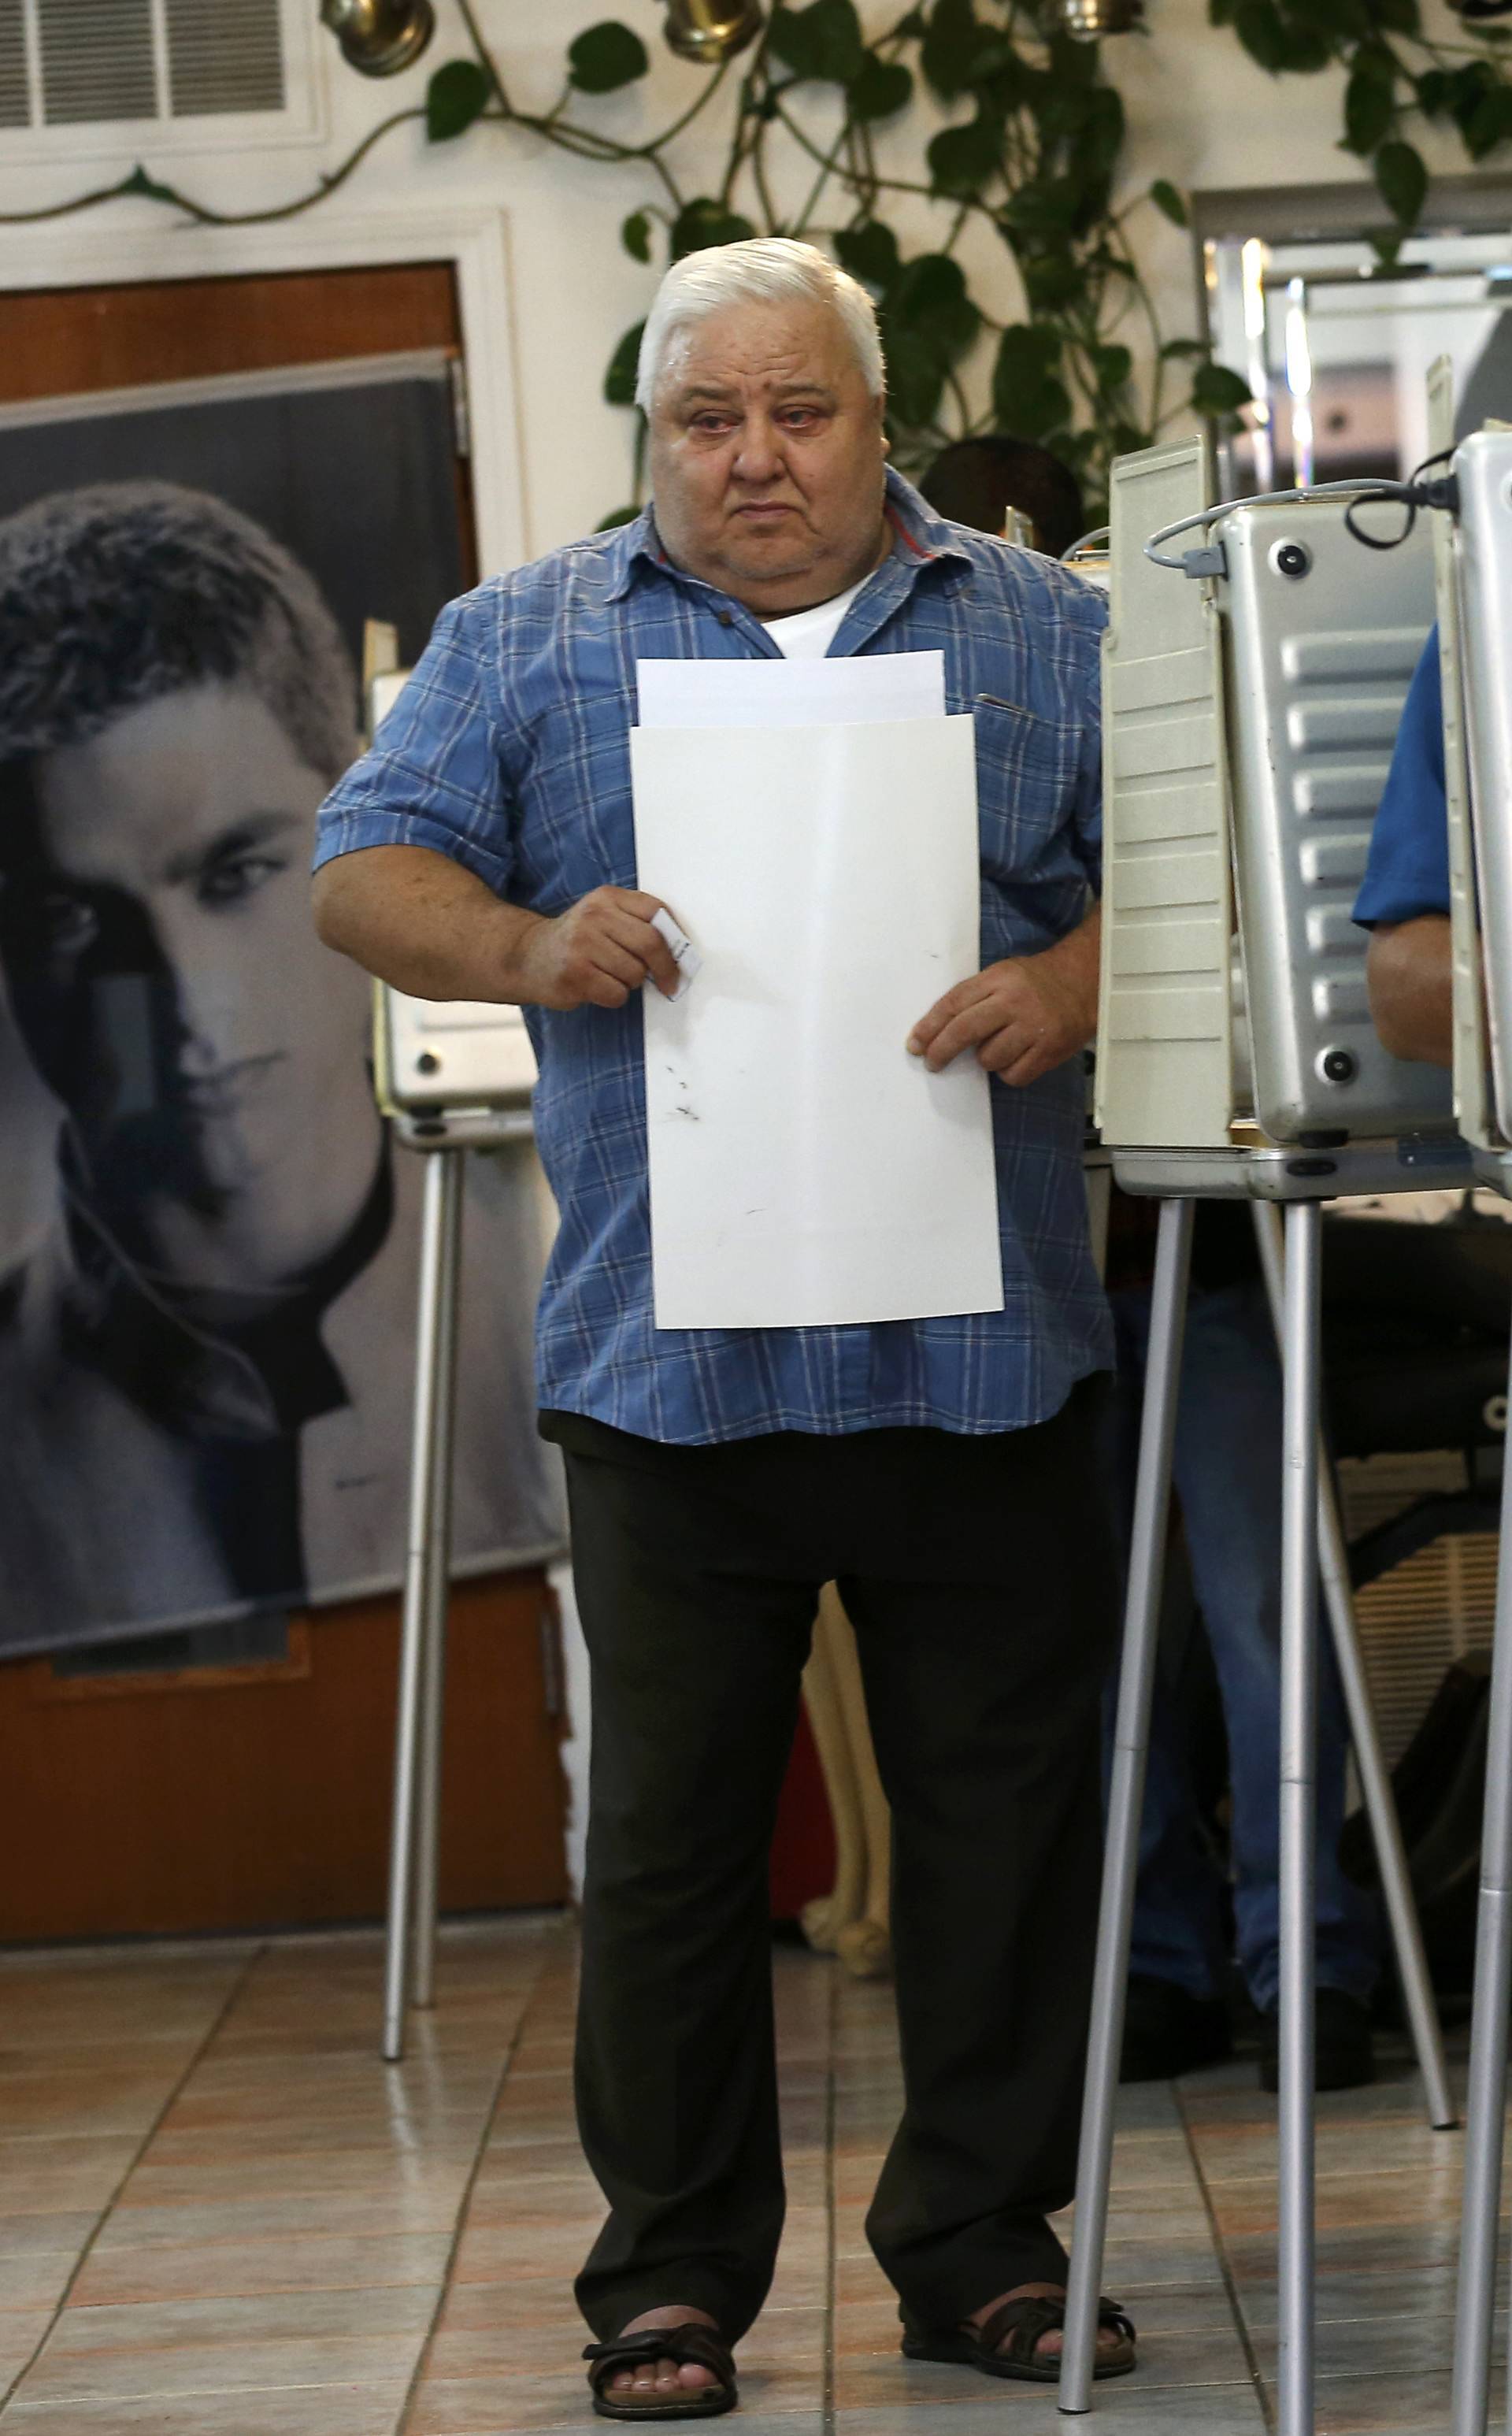 A voter waits to cast his ballot in the U.S. presidential election at Daisy's Hair Studio in Chicago